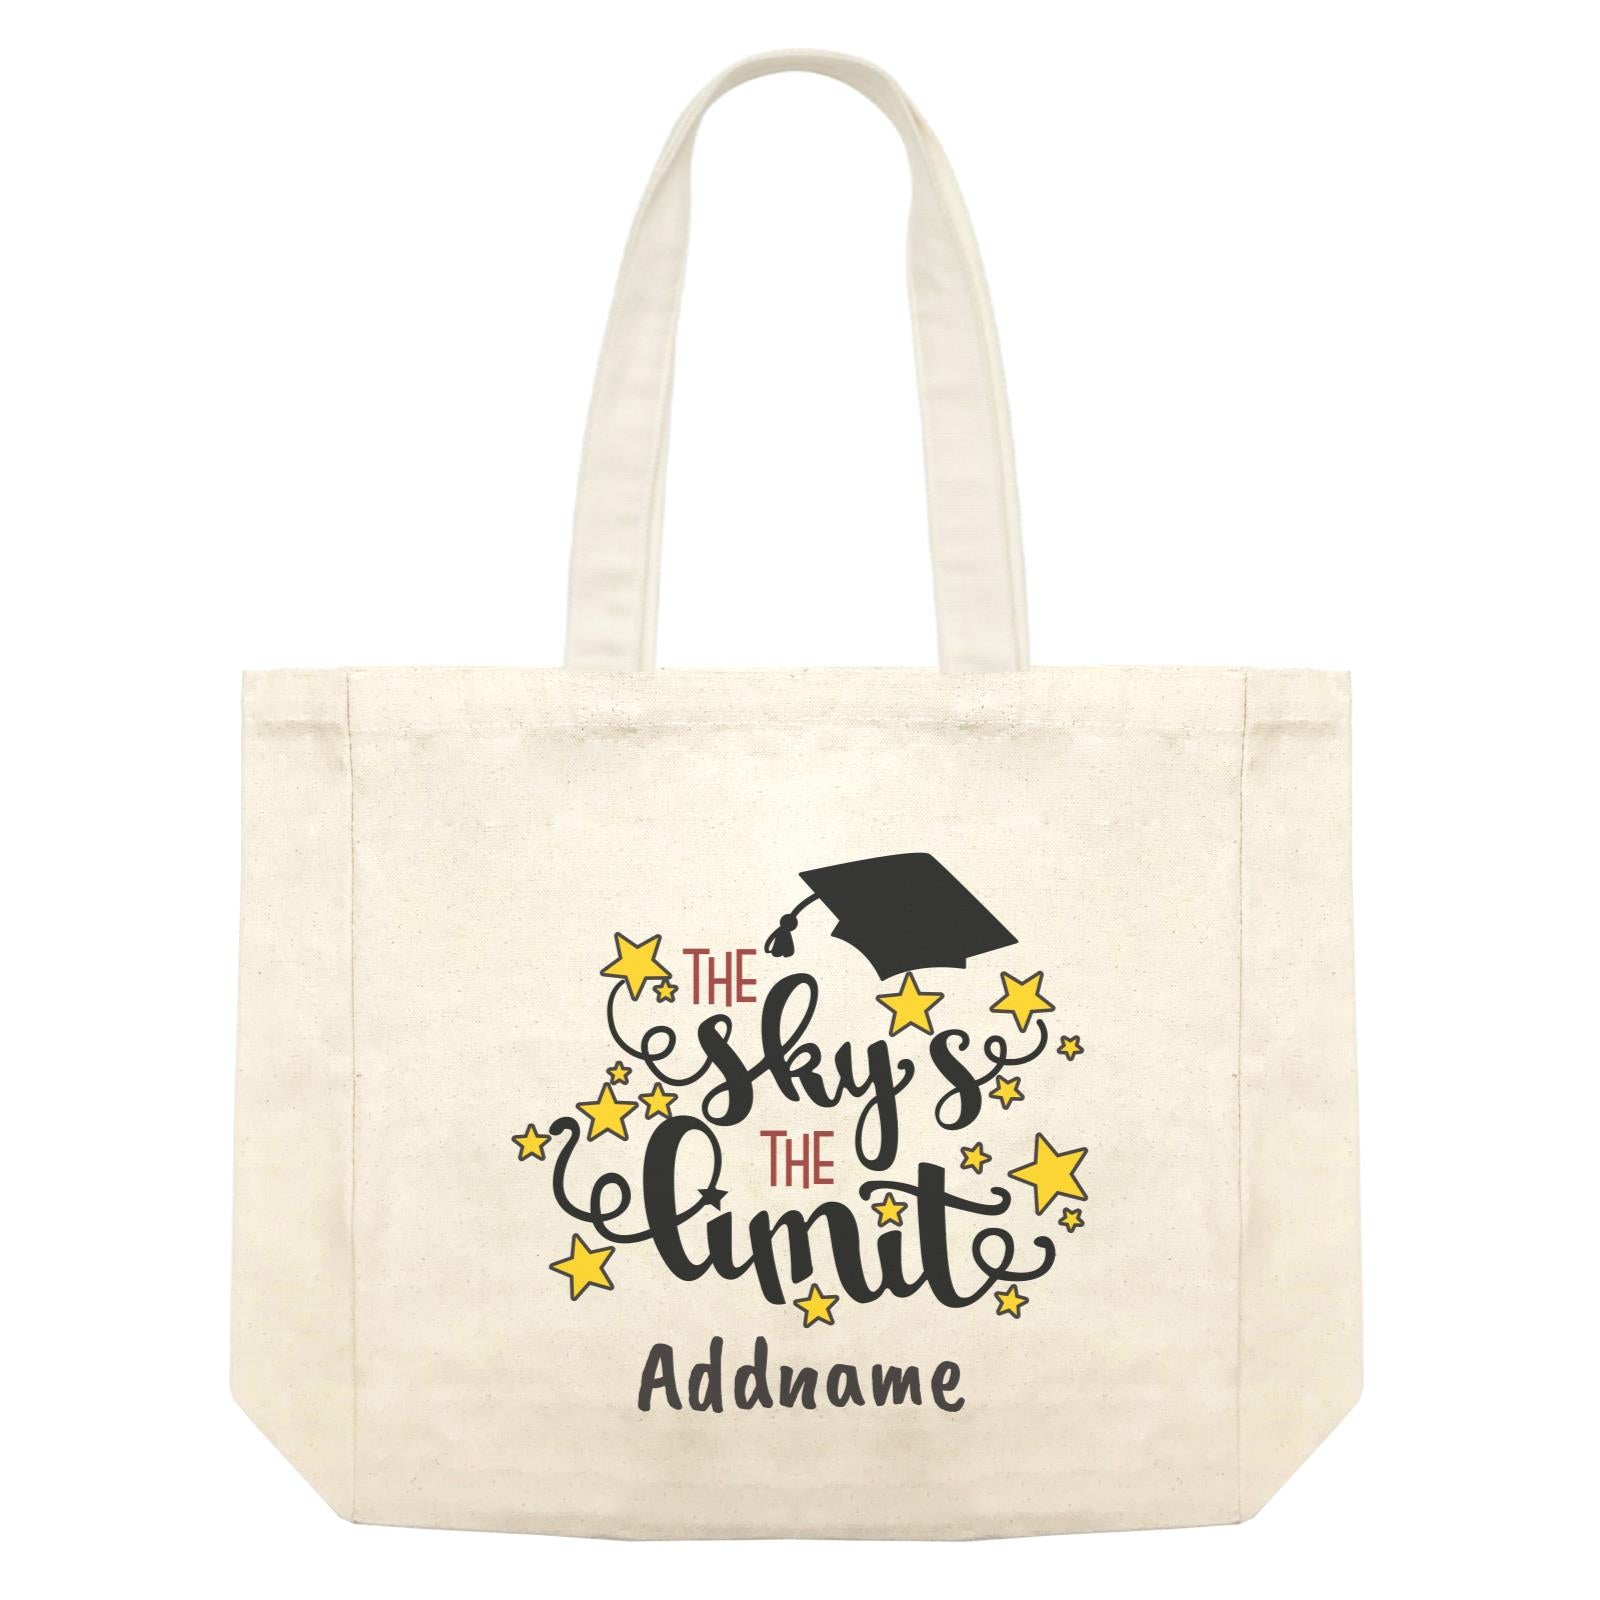 Graduation Series The Sky's The Limit Shopping Bag